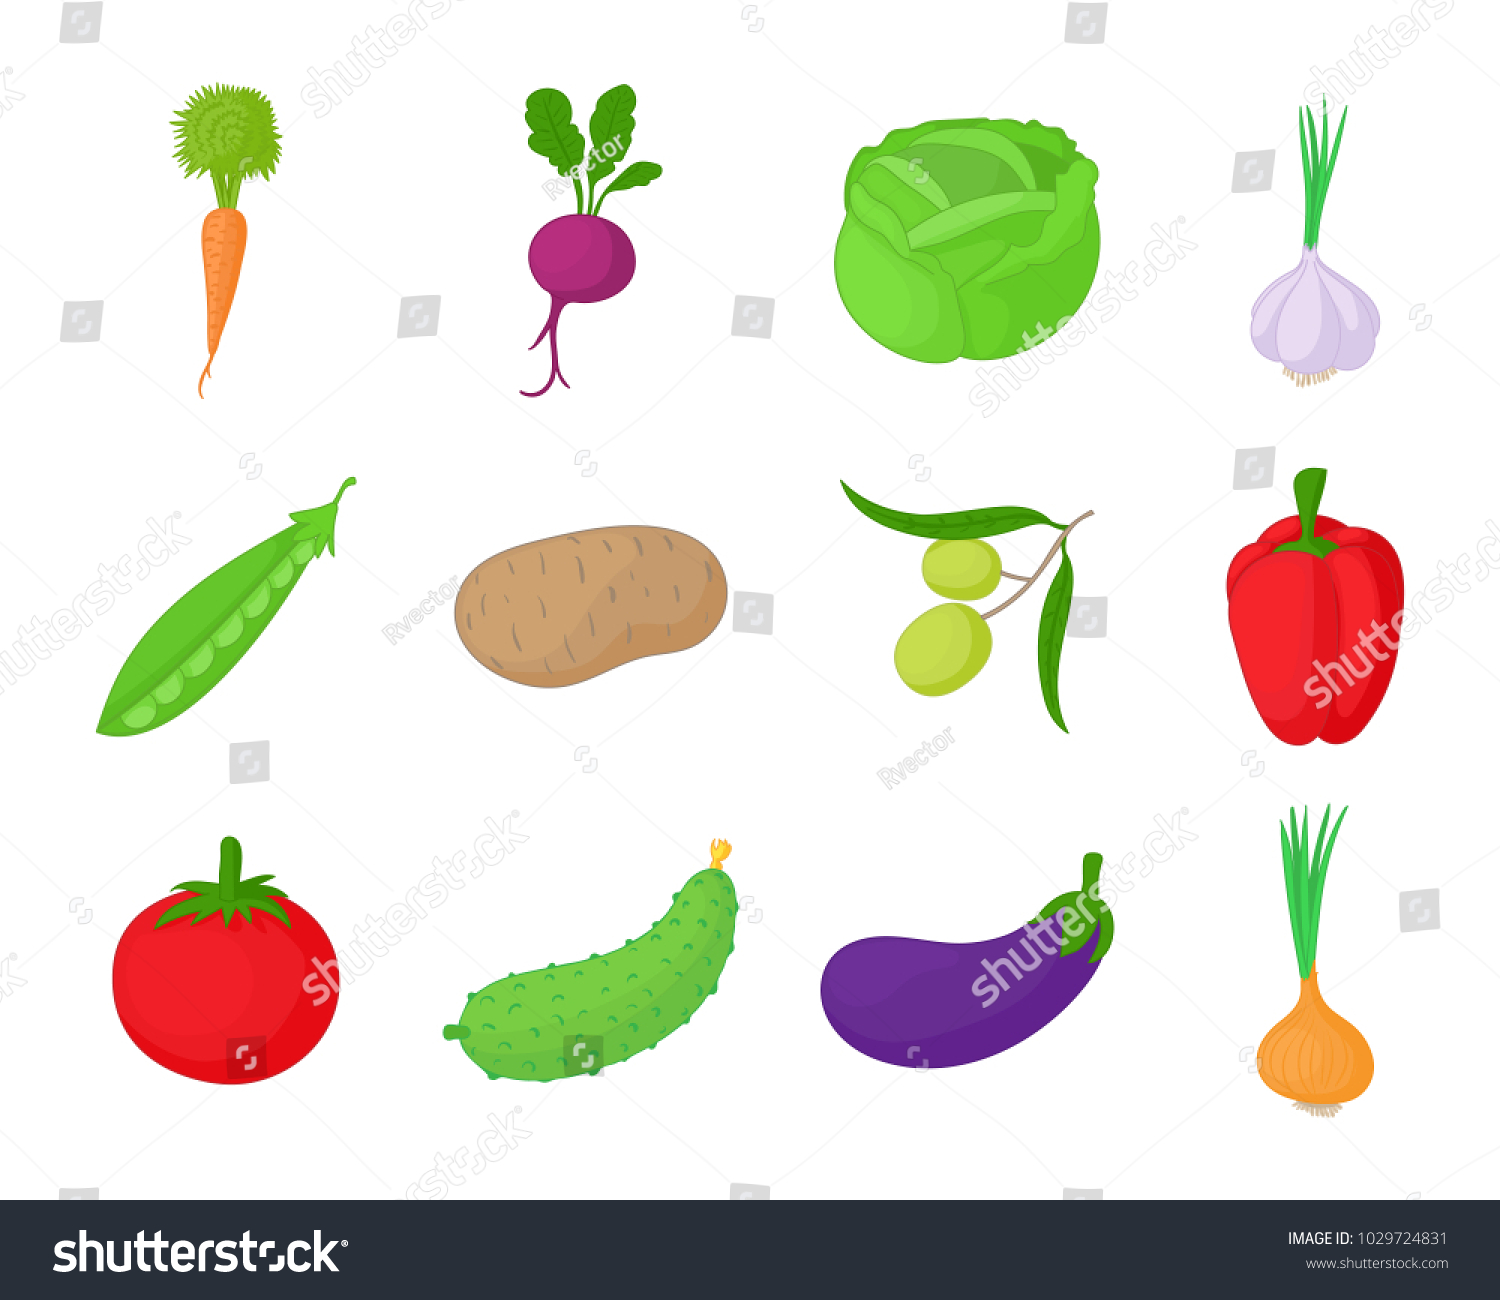 Vegetables icon set. Cartoon set of vegetables vector icons for web design isolated on white background #1029724831